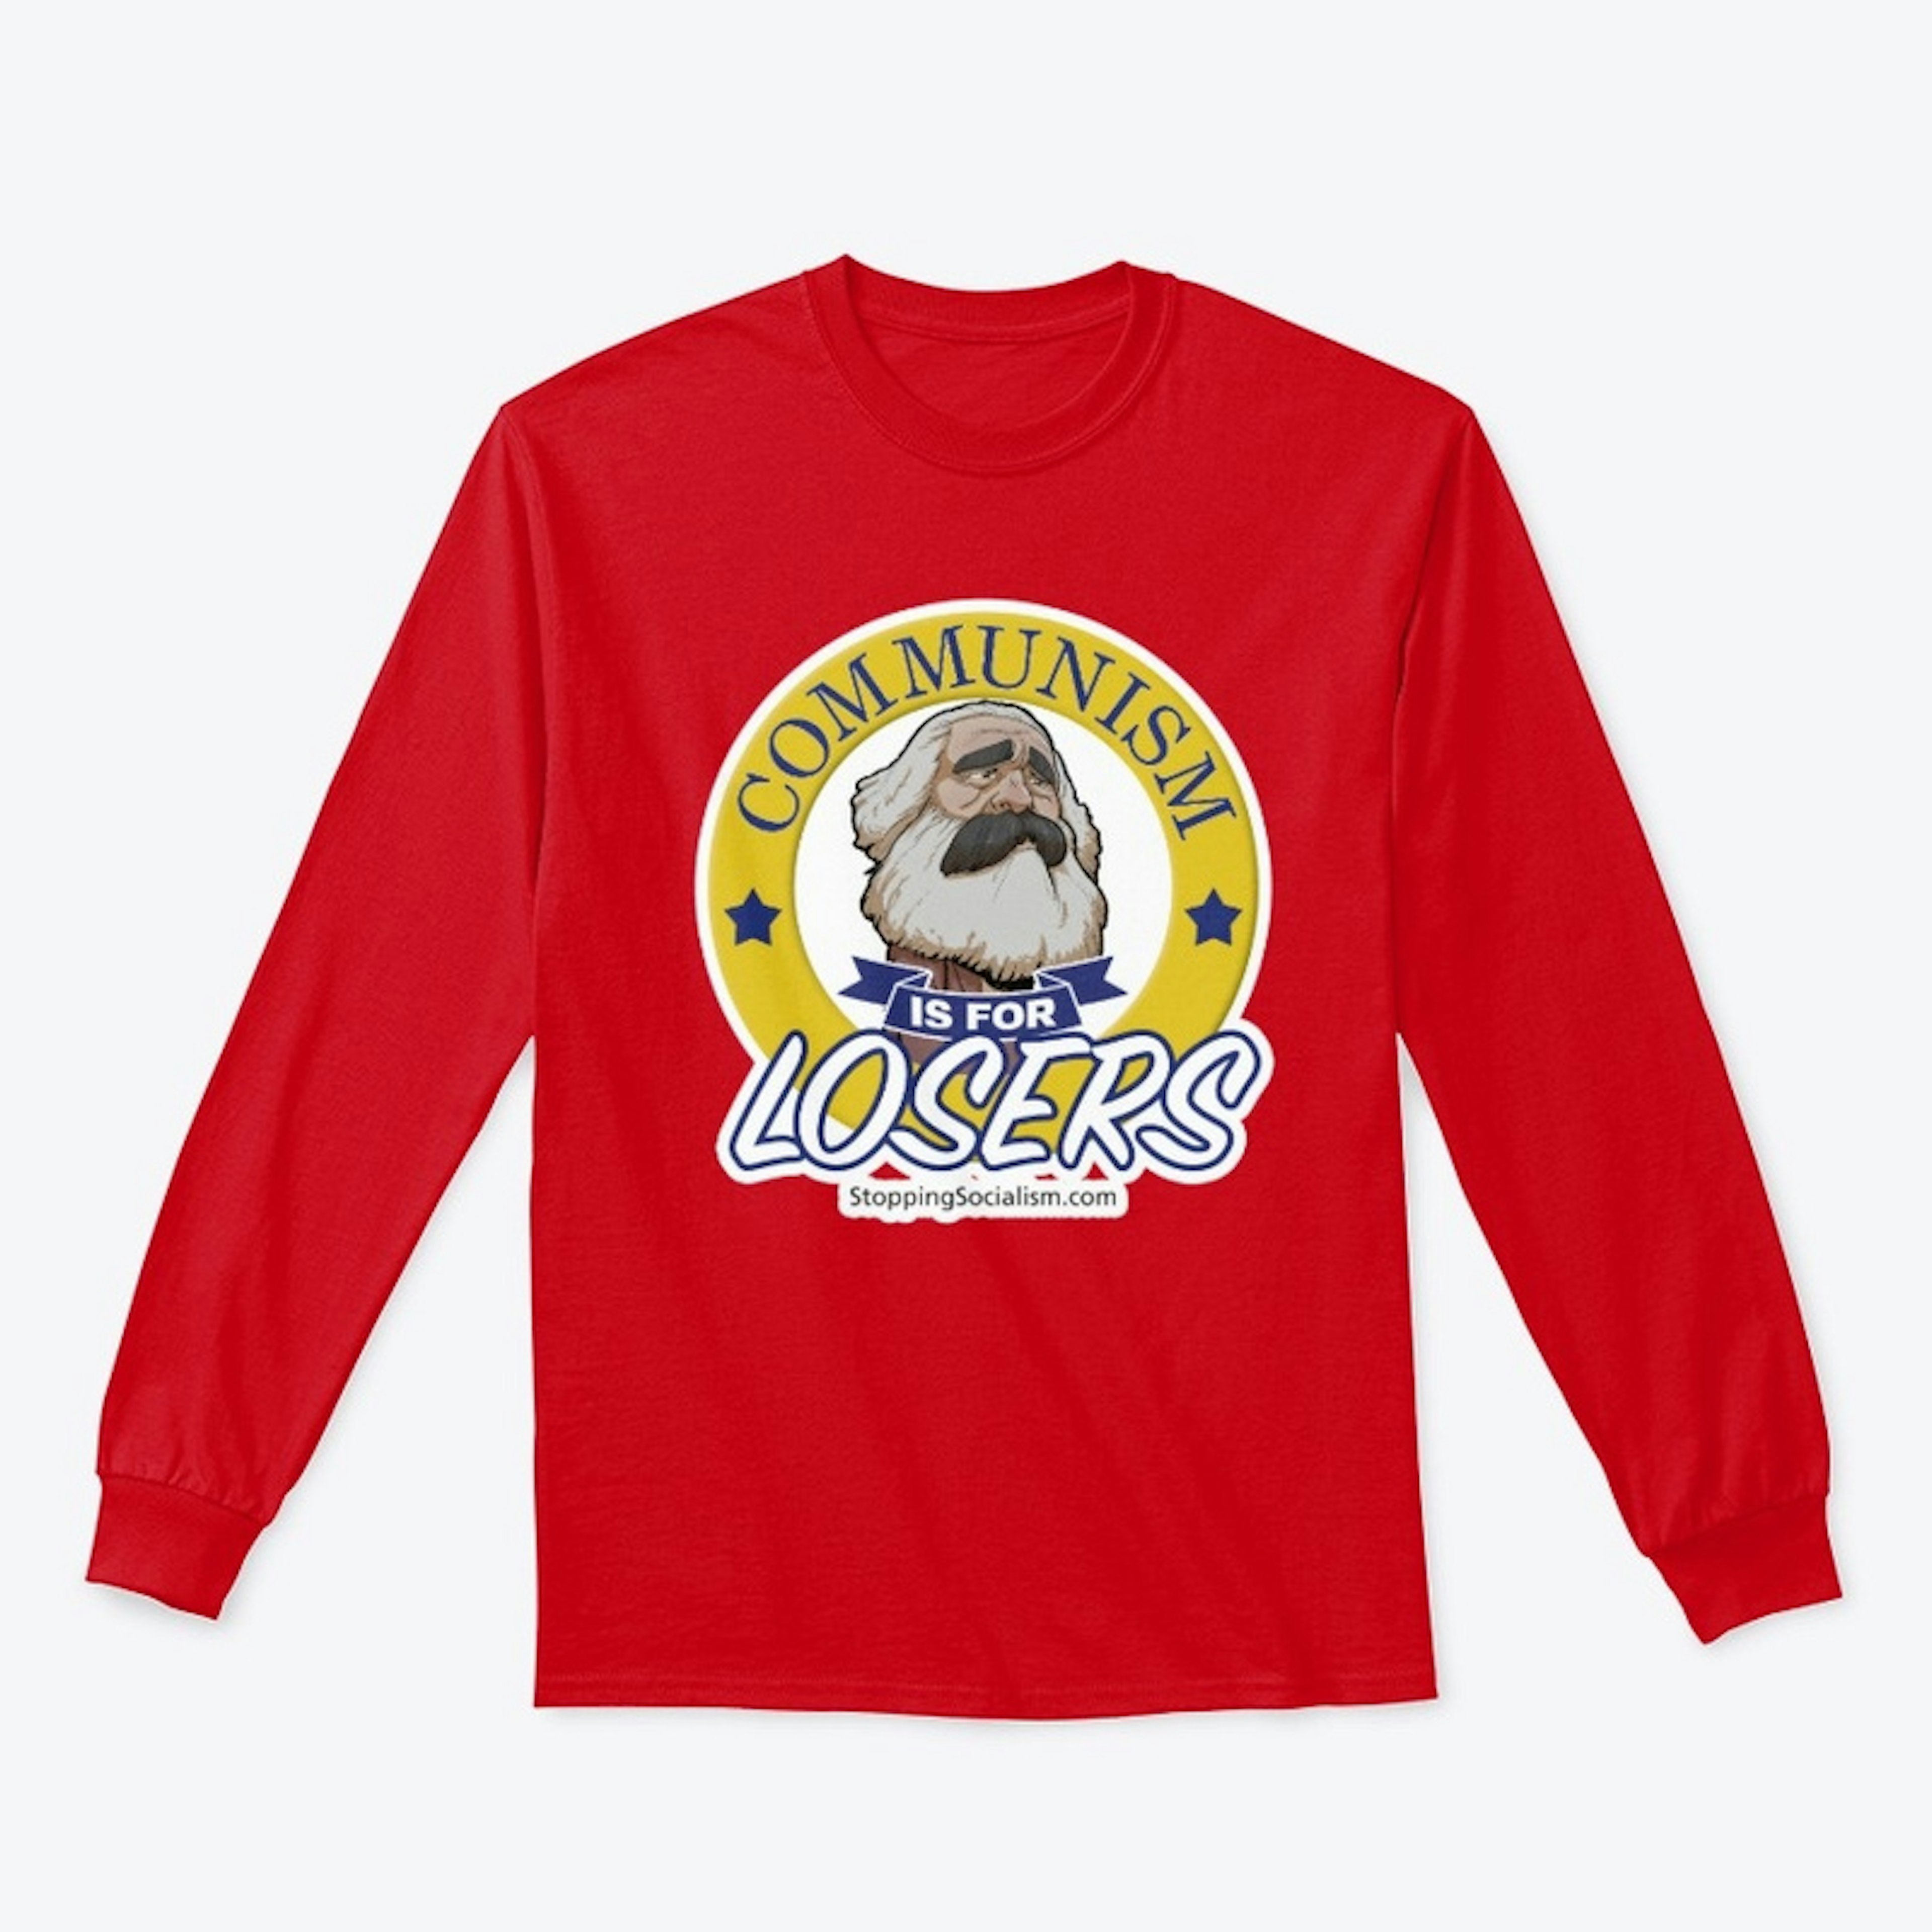 Marx Communism is for Losers Long Sleeve